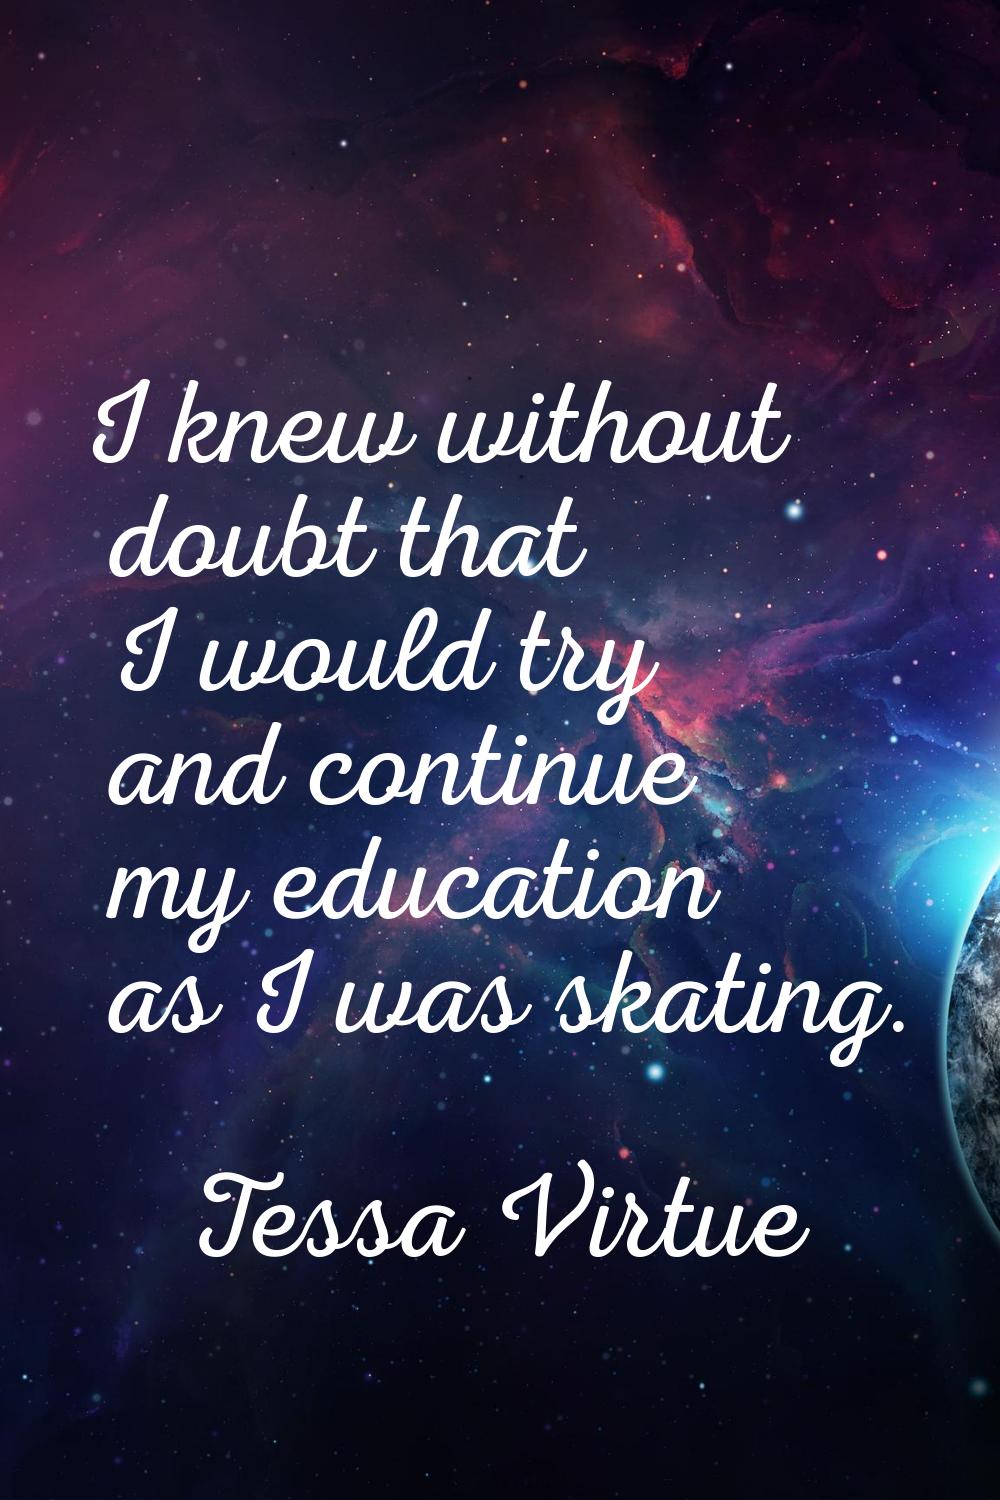 I knew without doubt that I would try and continue my education as I was skating.